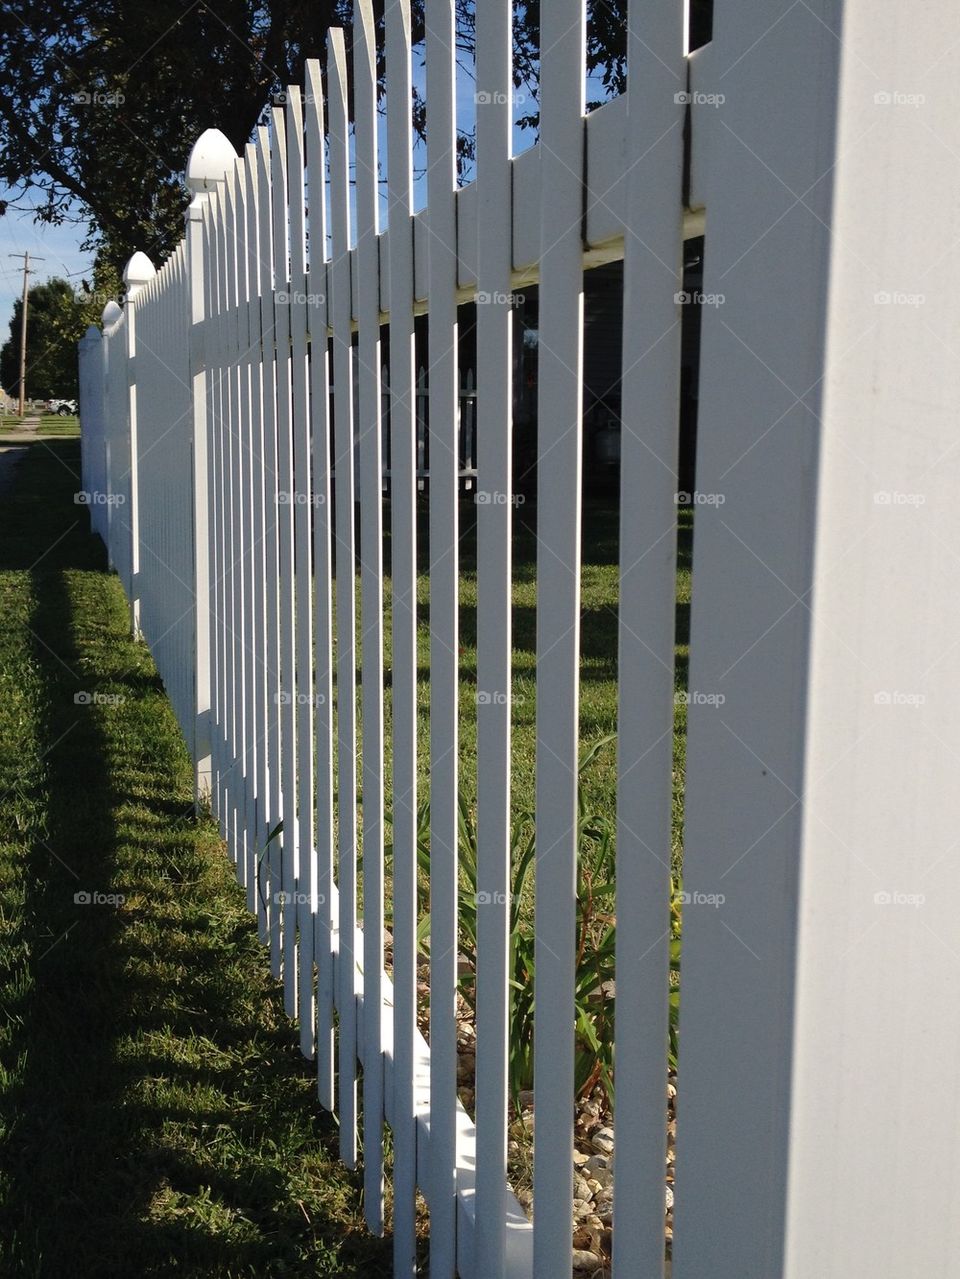 Little Picket Fences in the Front Yards